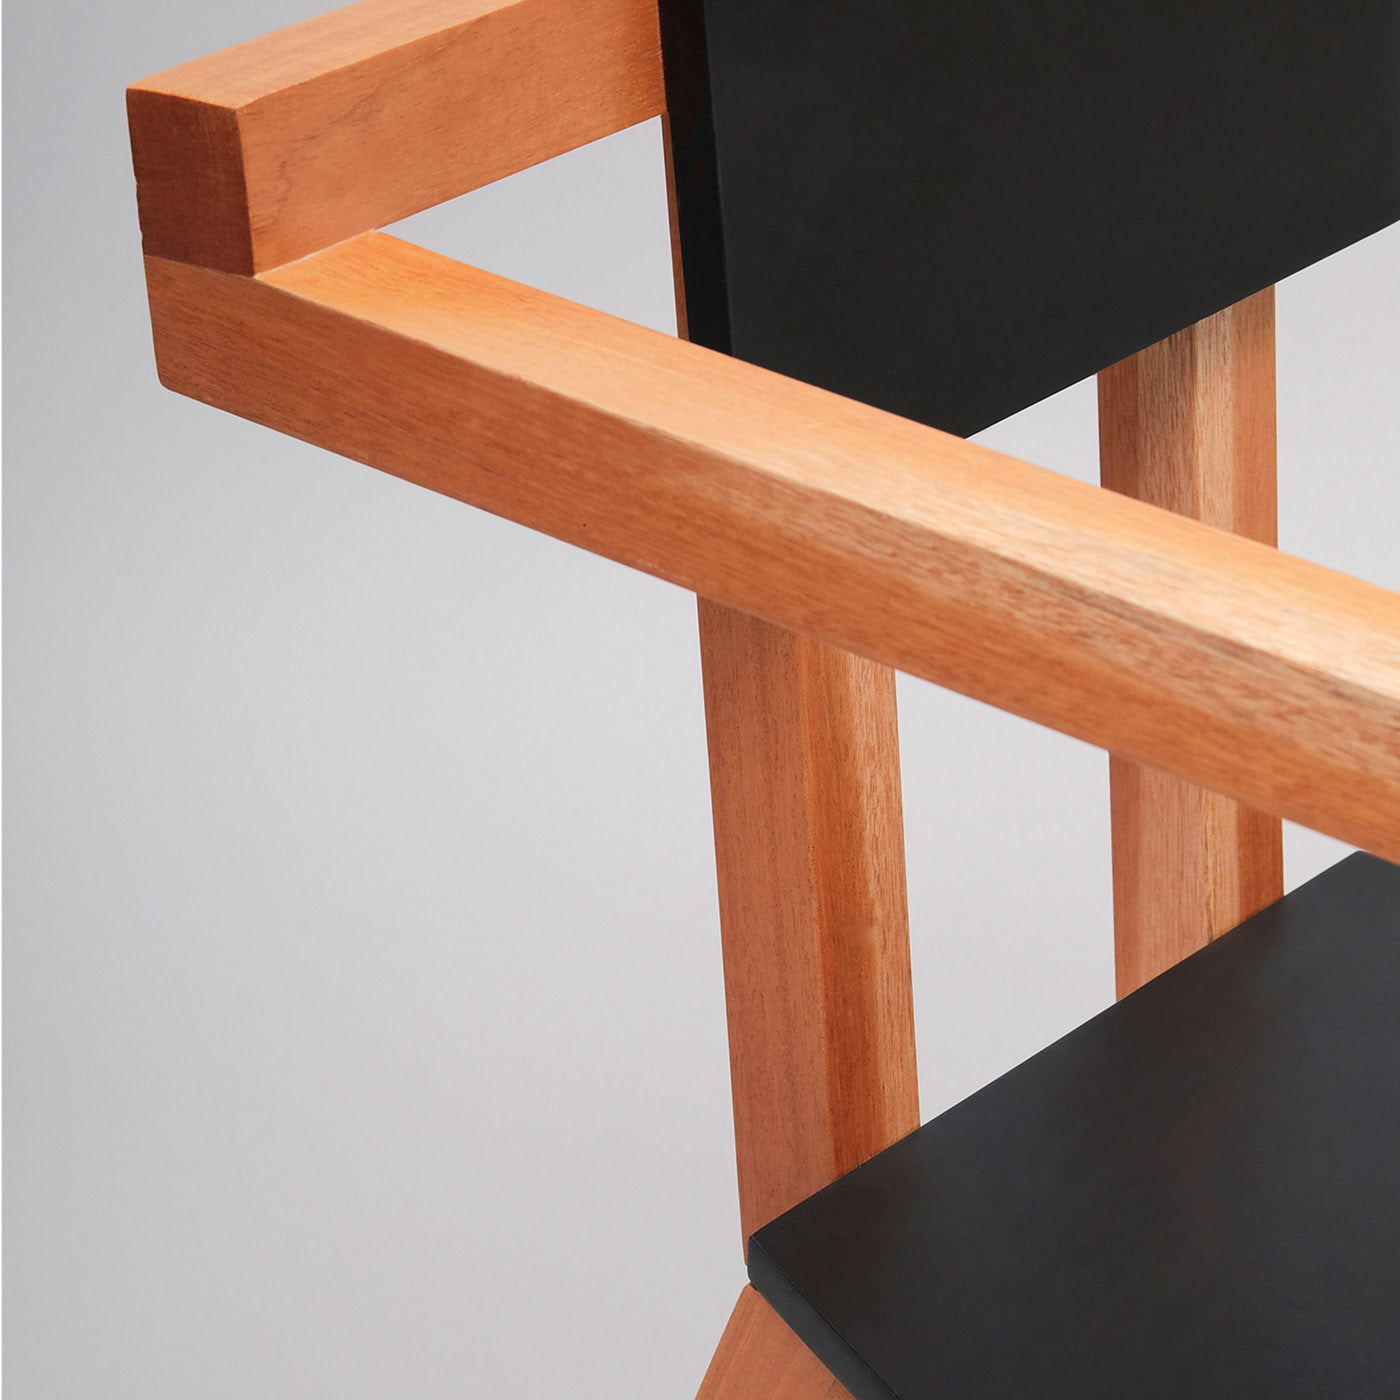 Kaspa Negra Chair With Arms By Clemence Seilles - Alternative view 2